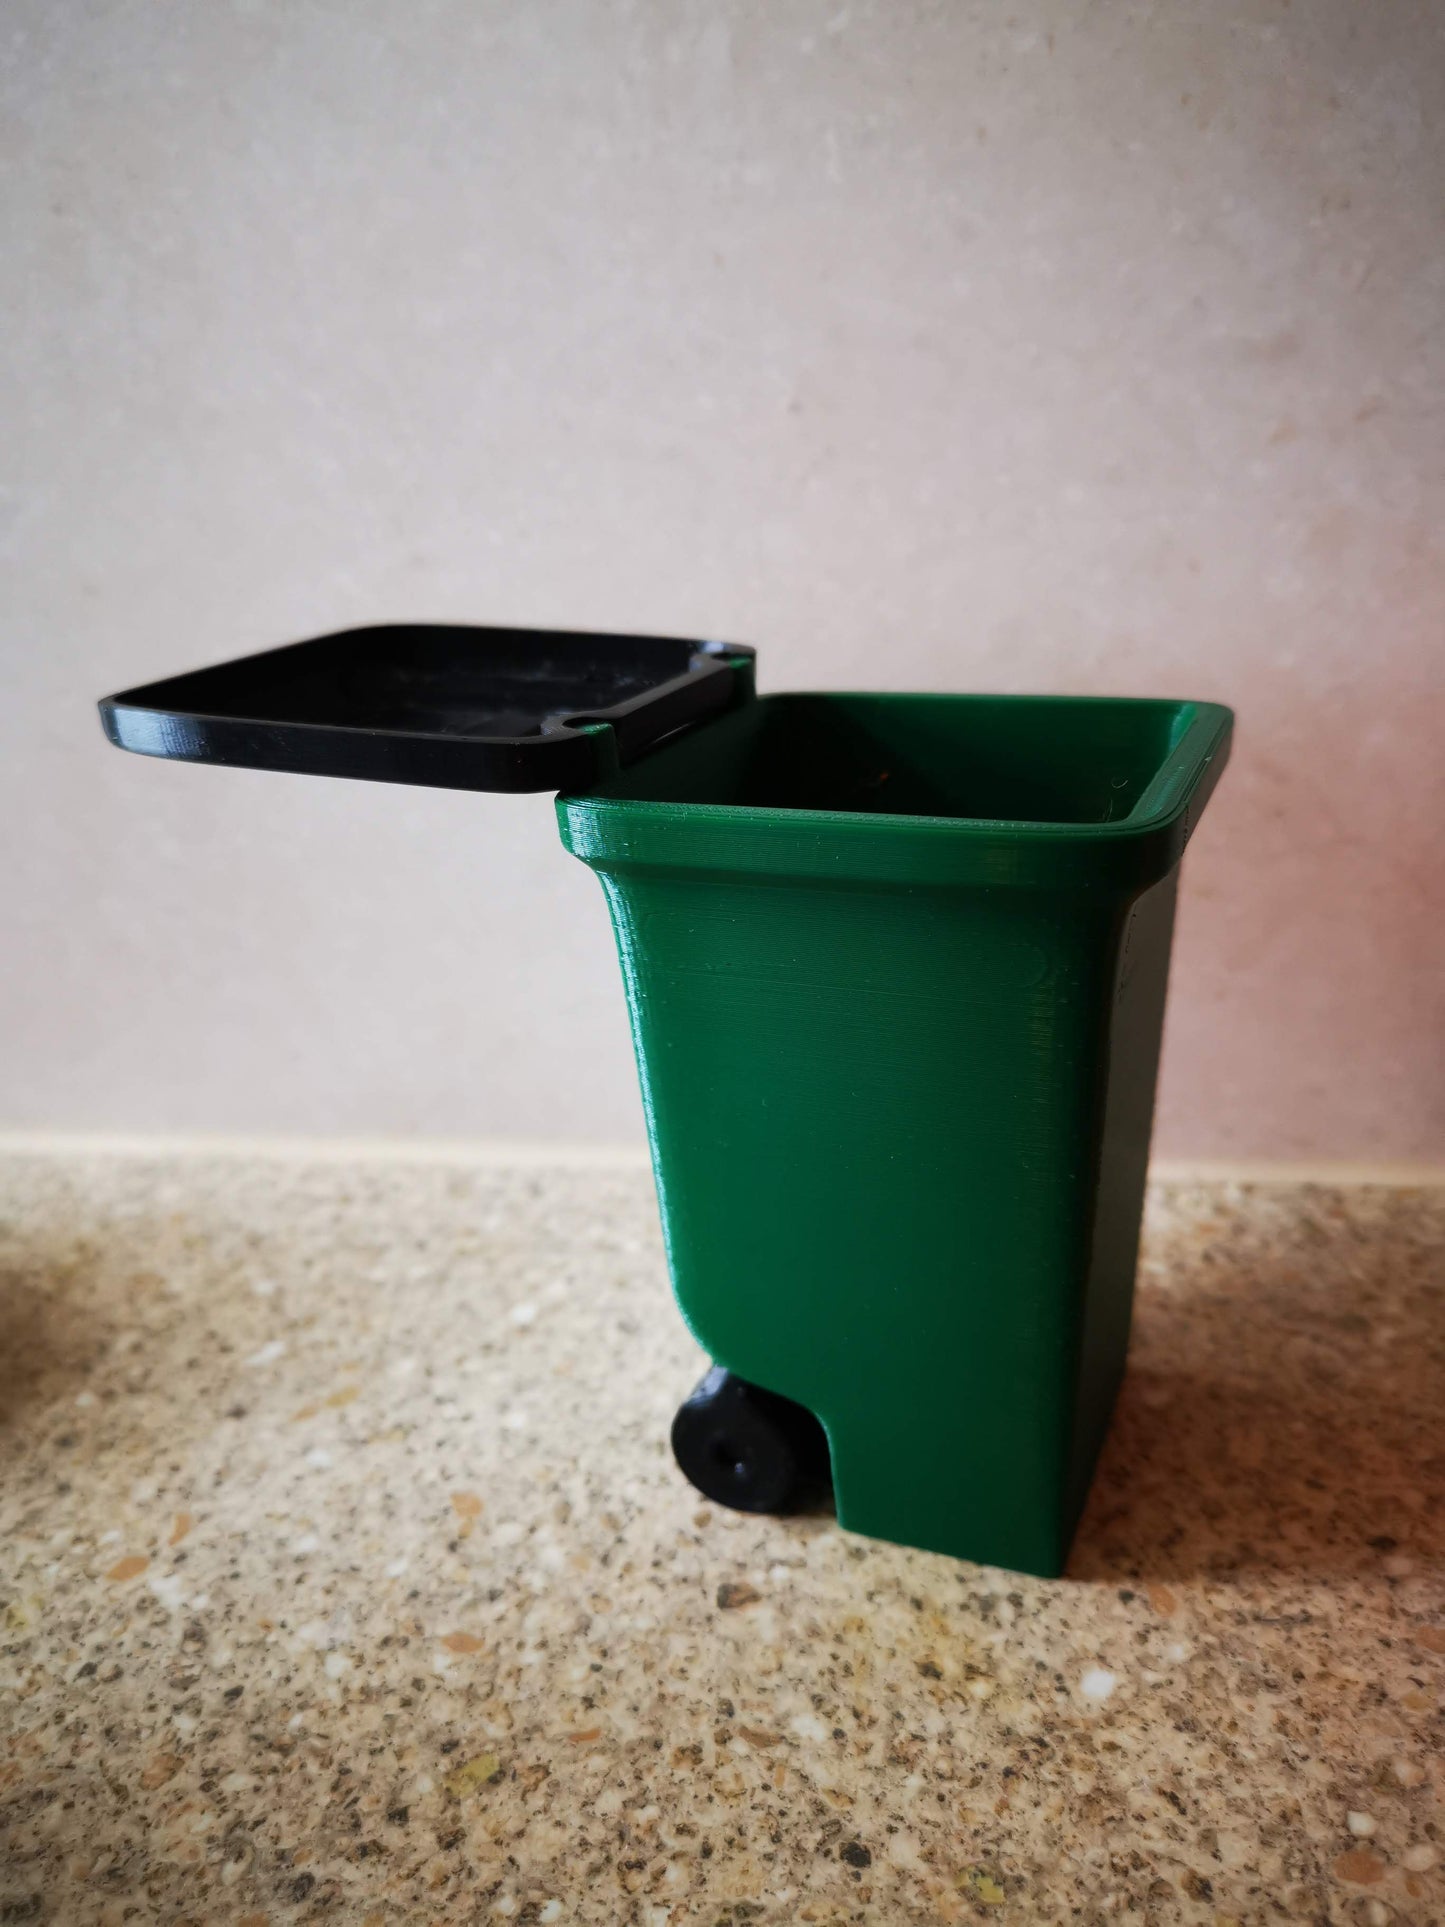 3D printed waste bin trash can with lid open